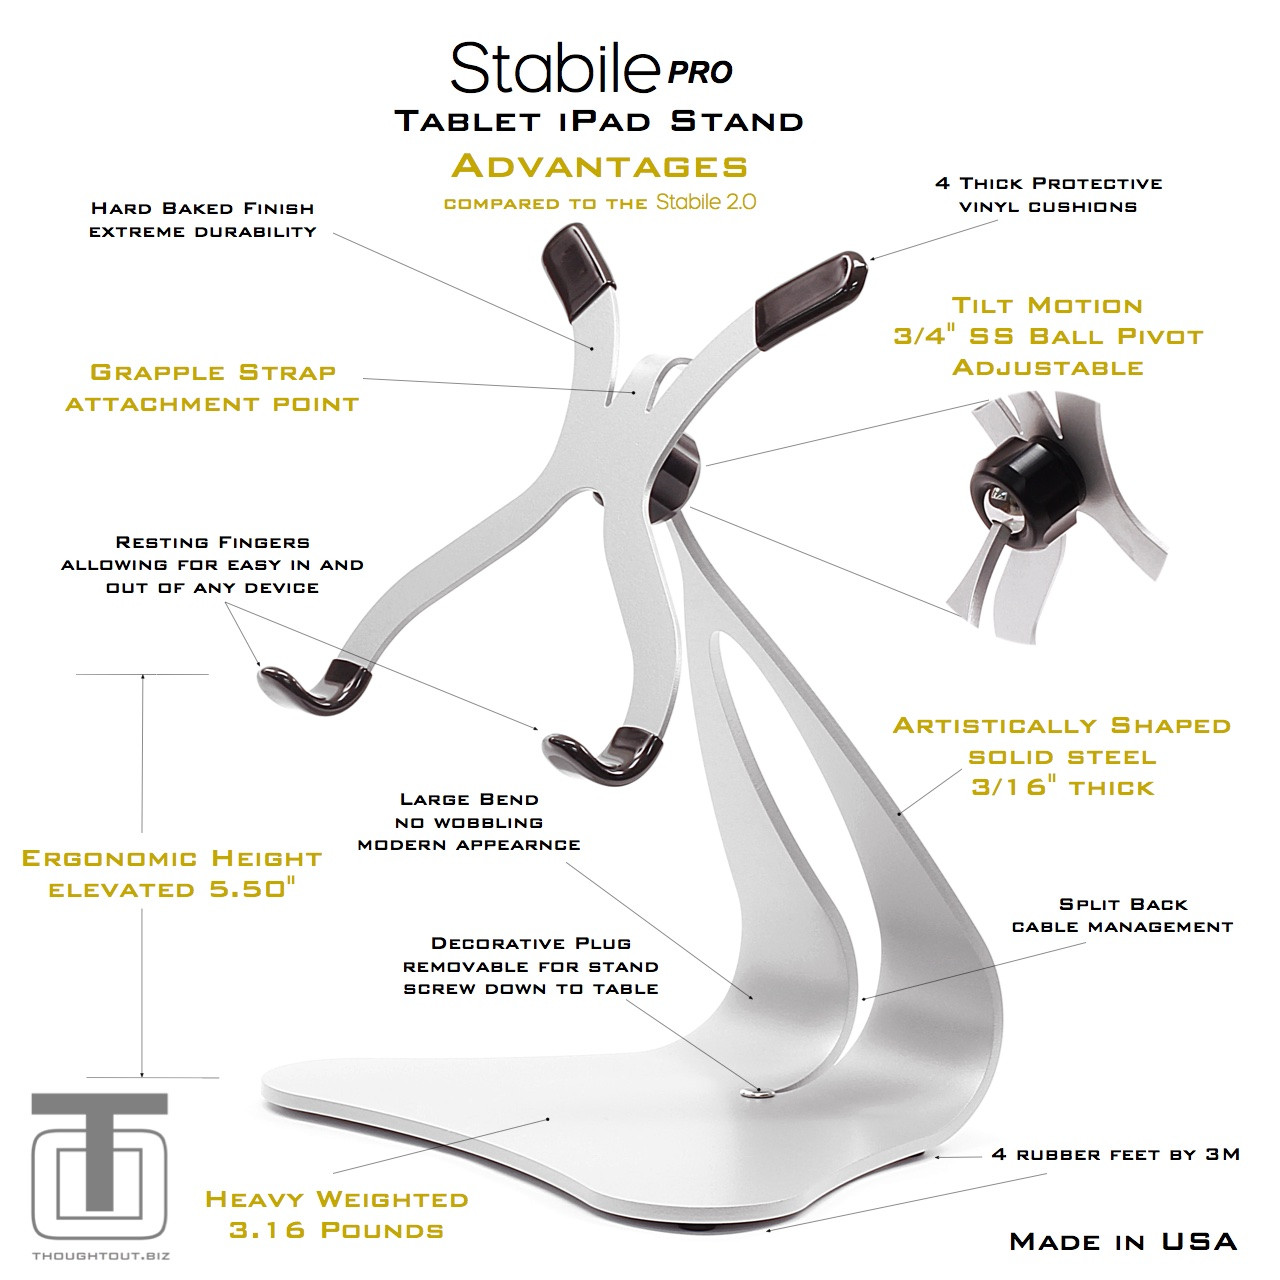 Stabile PRO Tablet iPad Stand Diagram